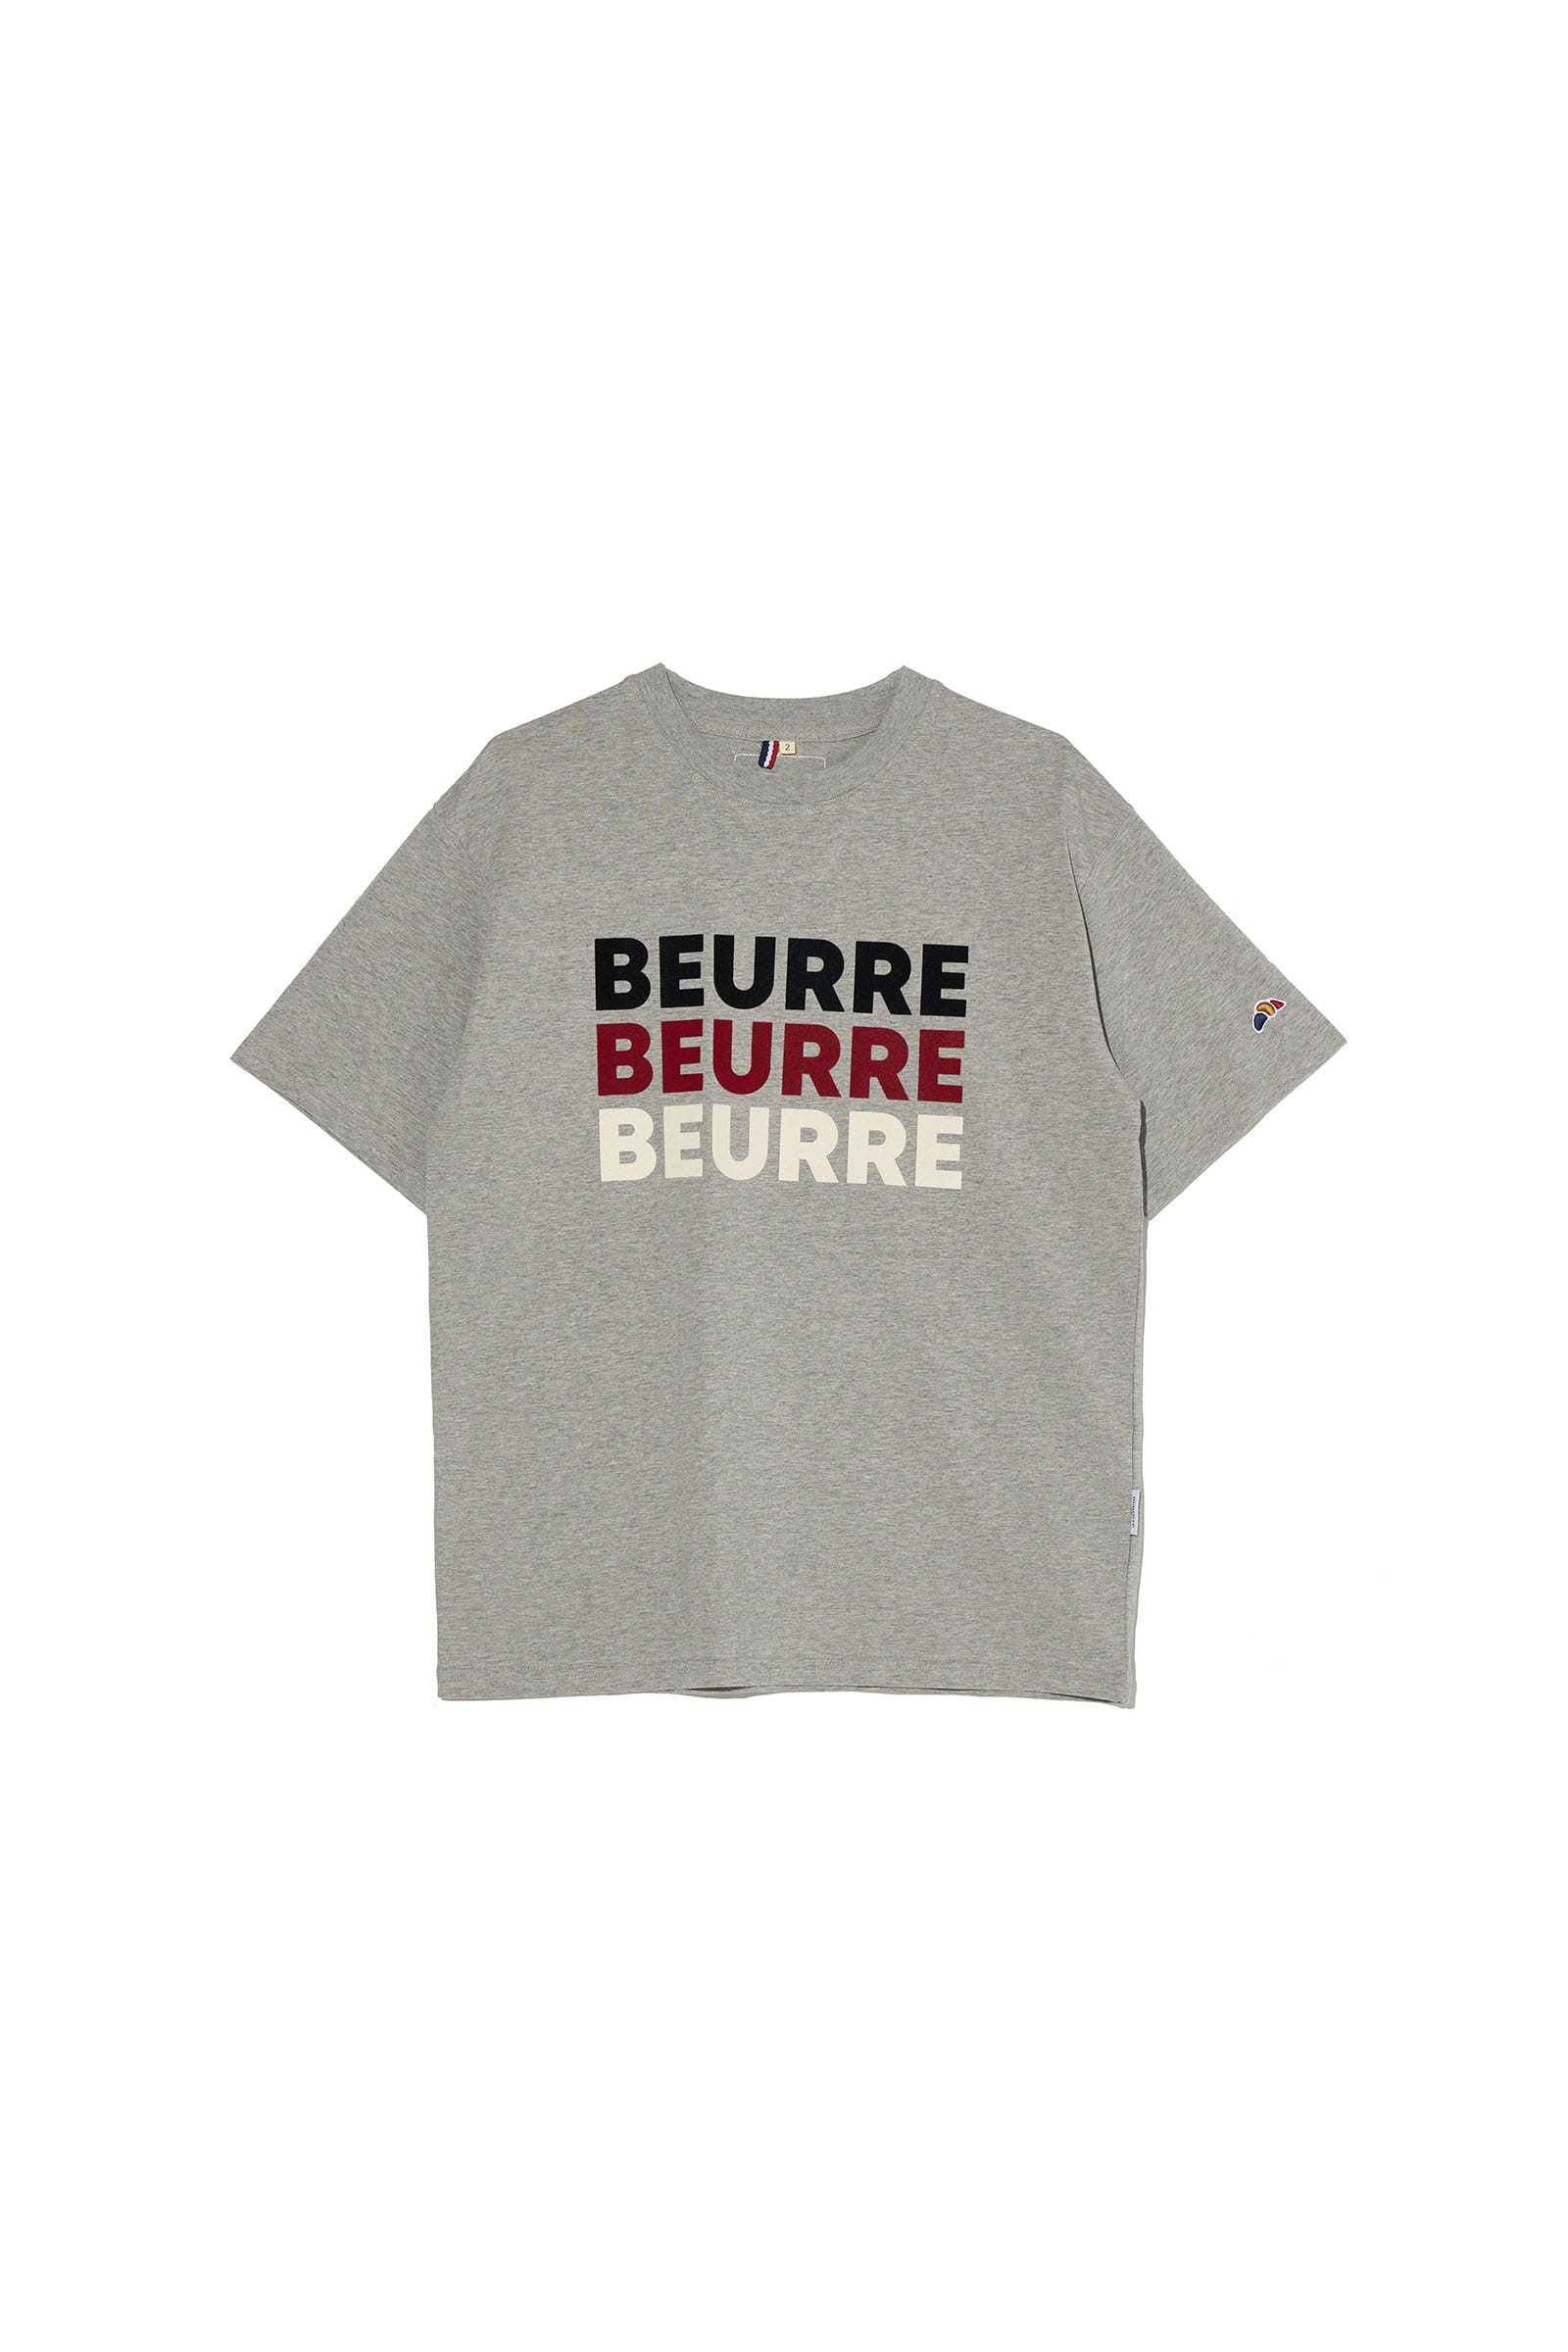 ep.6 BEURRE T-shirts (Gray)